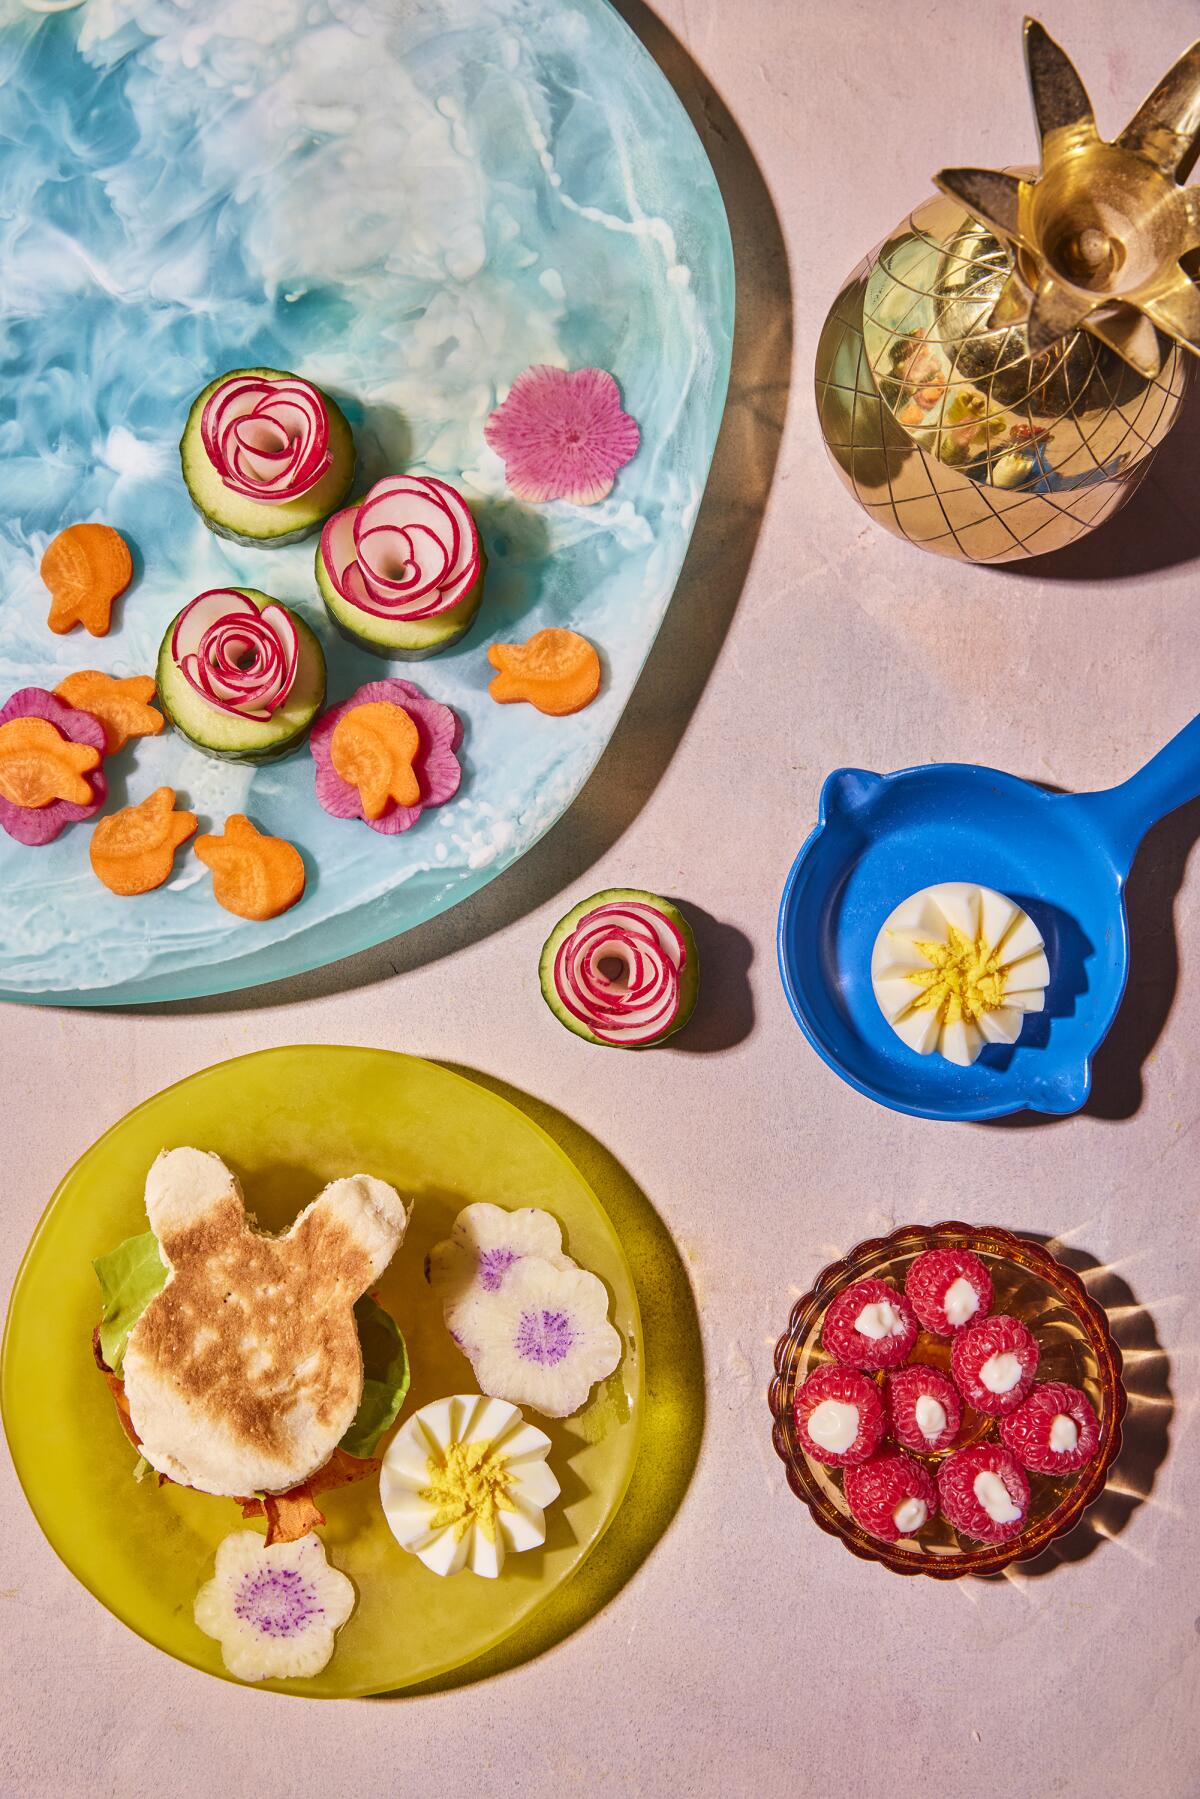 This image released by Harvest shows a breakfast recipe for carrot bacon along with watermelon radish and eggs in the shape of flowers and raspberry parfait bites from the book "Dictator Lunches: Inspired Meals That Will Compel Even the Toughest of Children" by Jenny Mollen. (Lauren Volo/Harvest via AP)